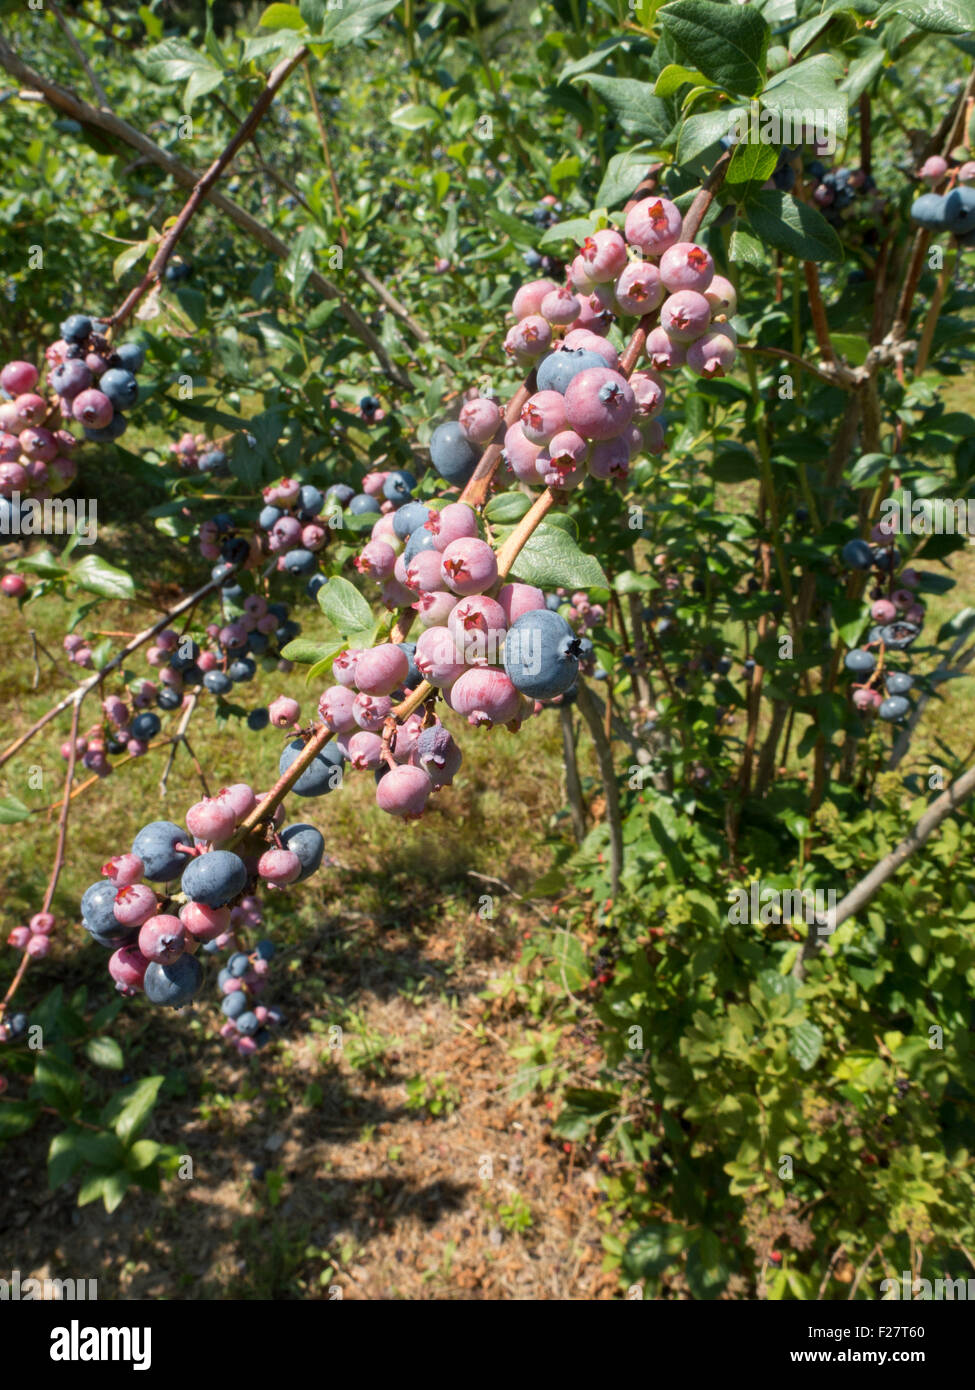 Bunch of blueberries with ripe and unripe berries growing in pick your own farm in      Florida, Massachusetts. Stock Photo